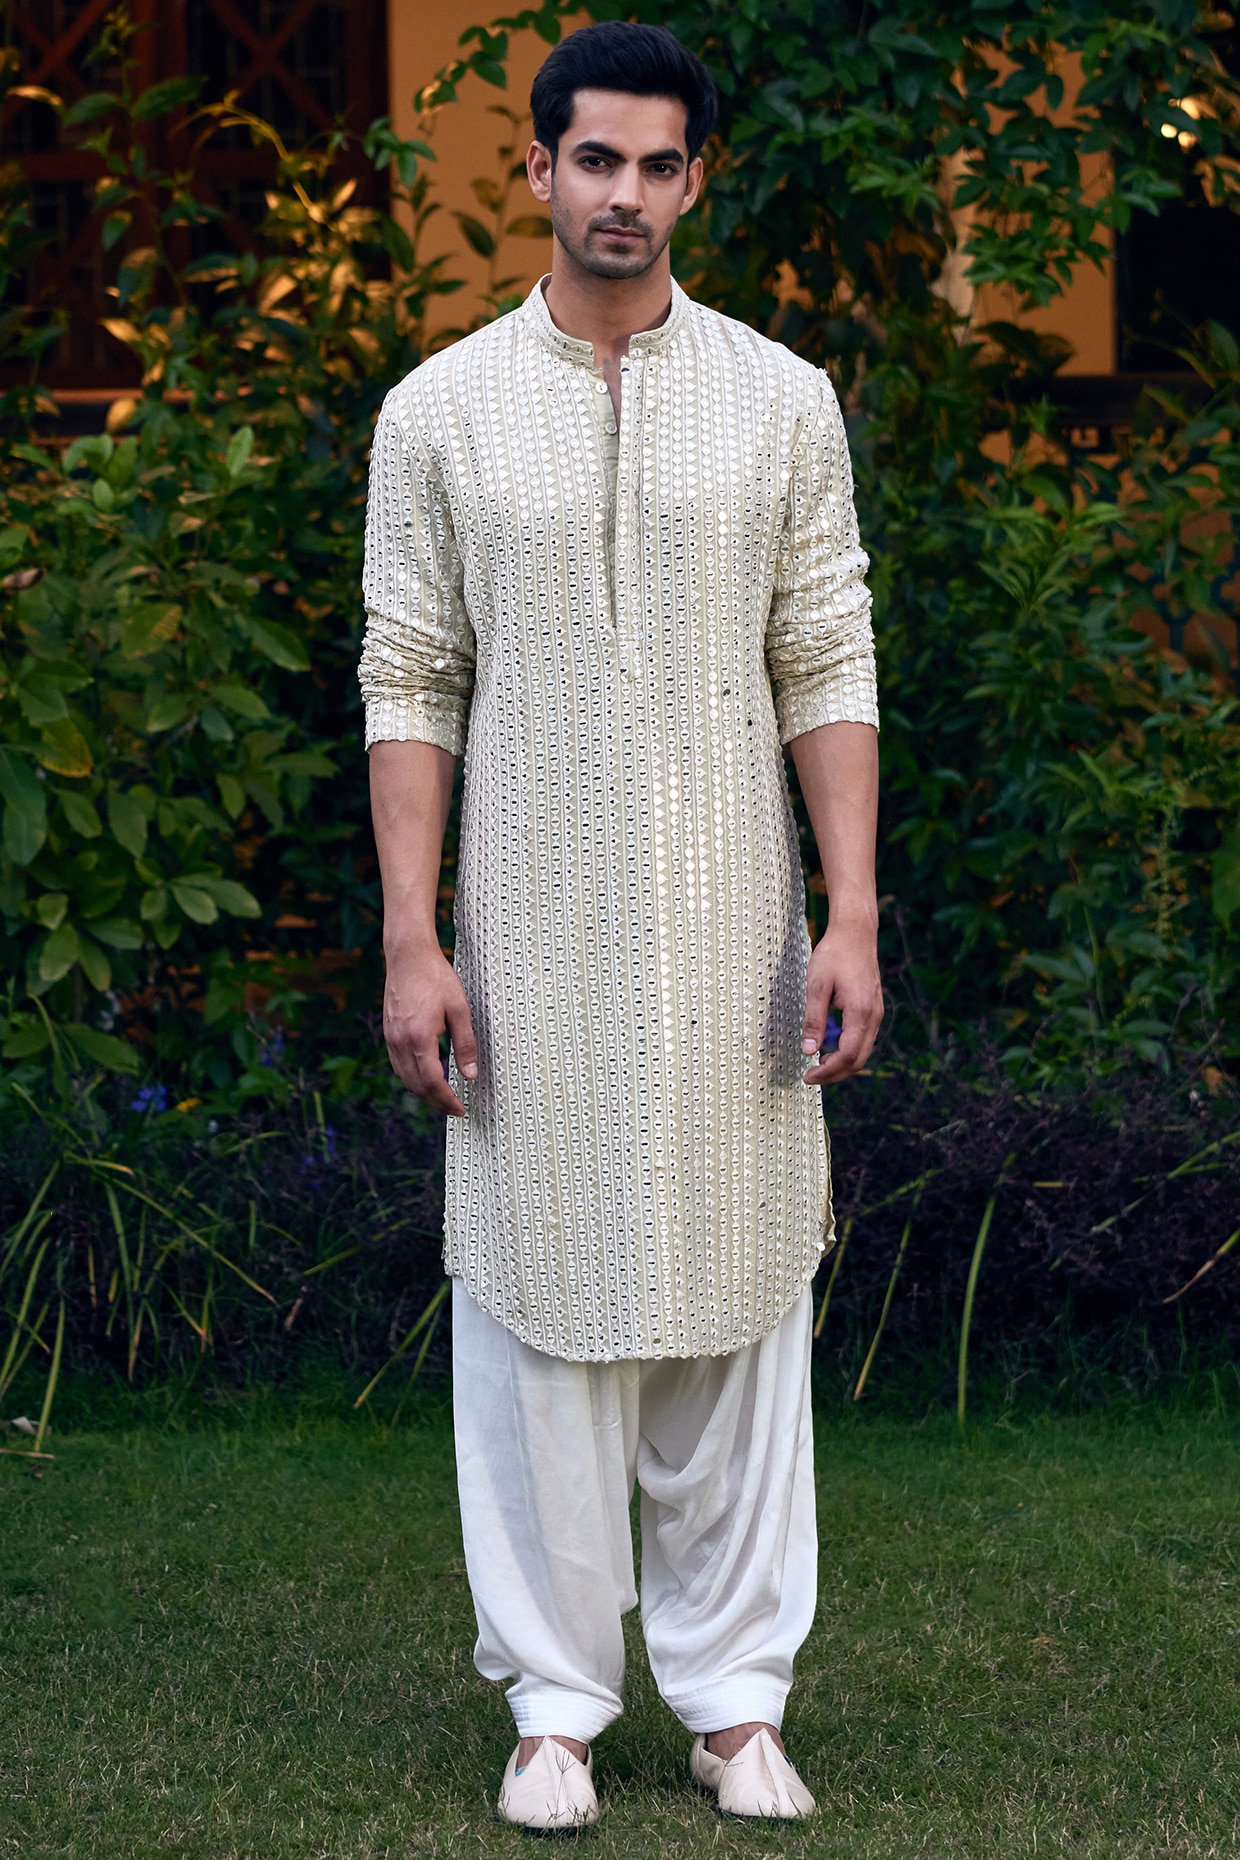 Grab The Attention With These Amazing Haldi Ceremony Outfits | Sherwani,  Indian men fashion, Haldi ceremony